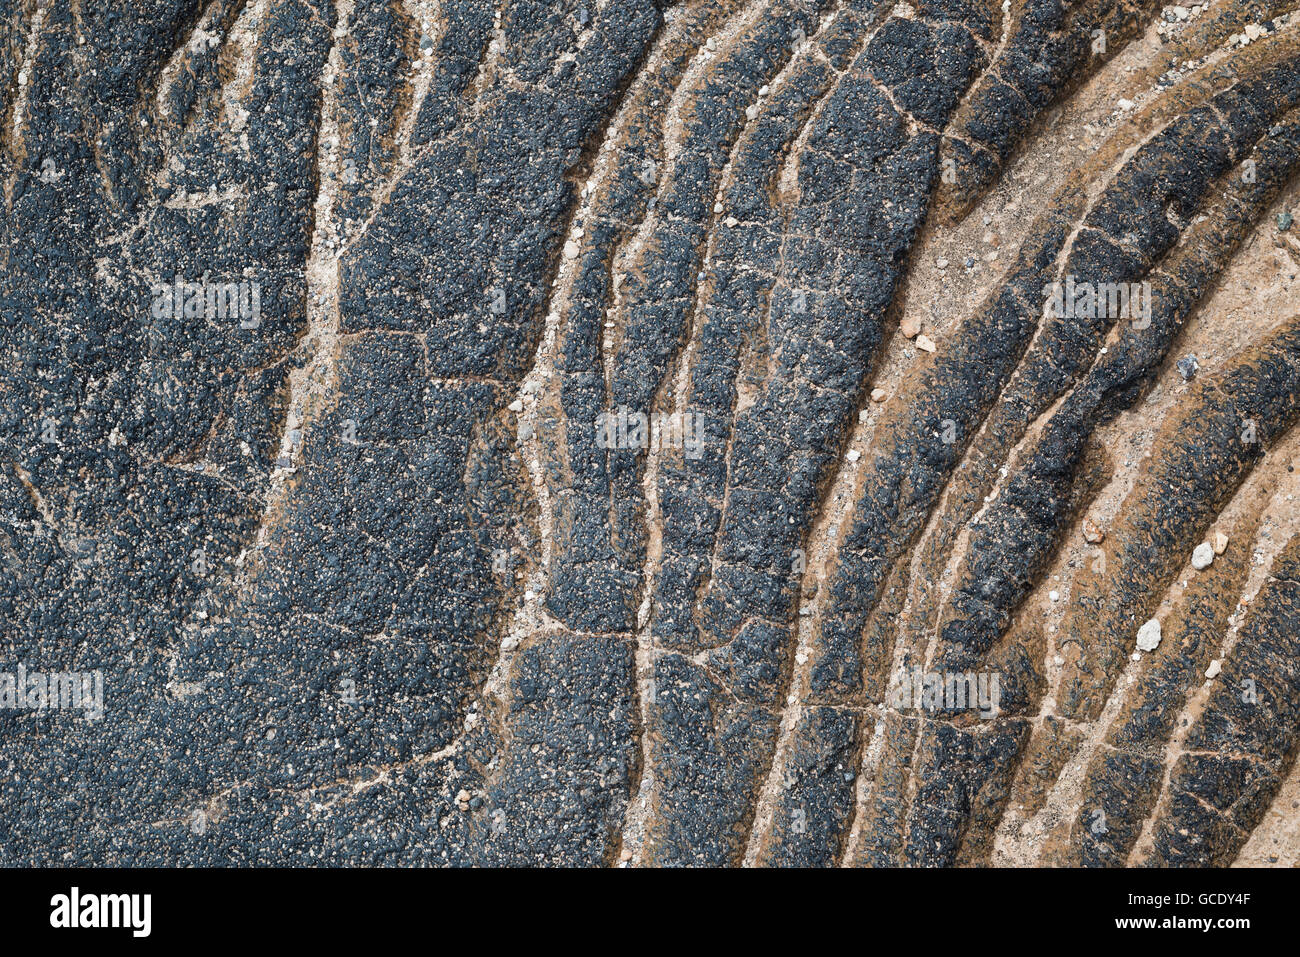 Detail of weathered pahoehoe or ropy lava forming the surface of a public footpath between Aldea Blanca and San Miguel, Tenerife Stock Photo